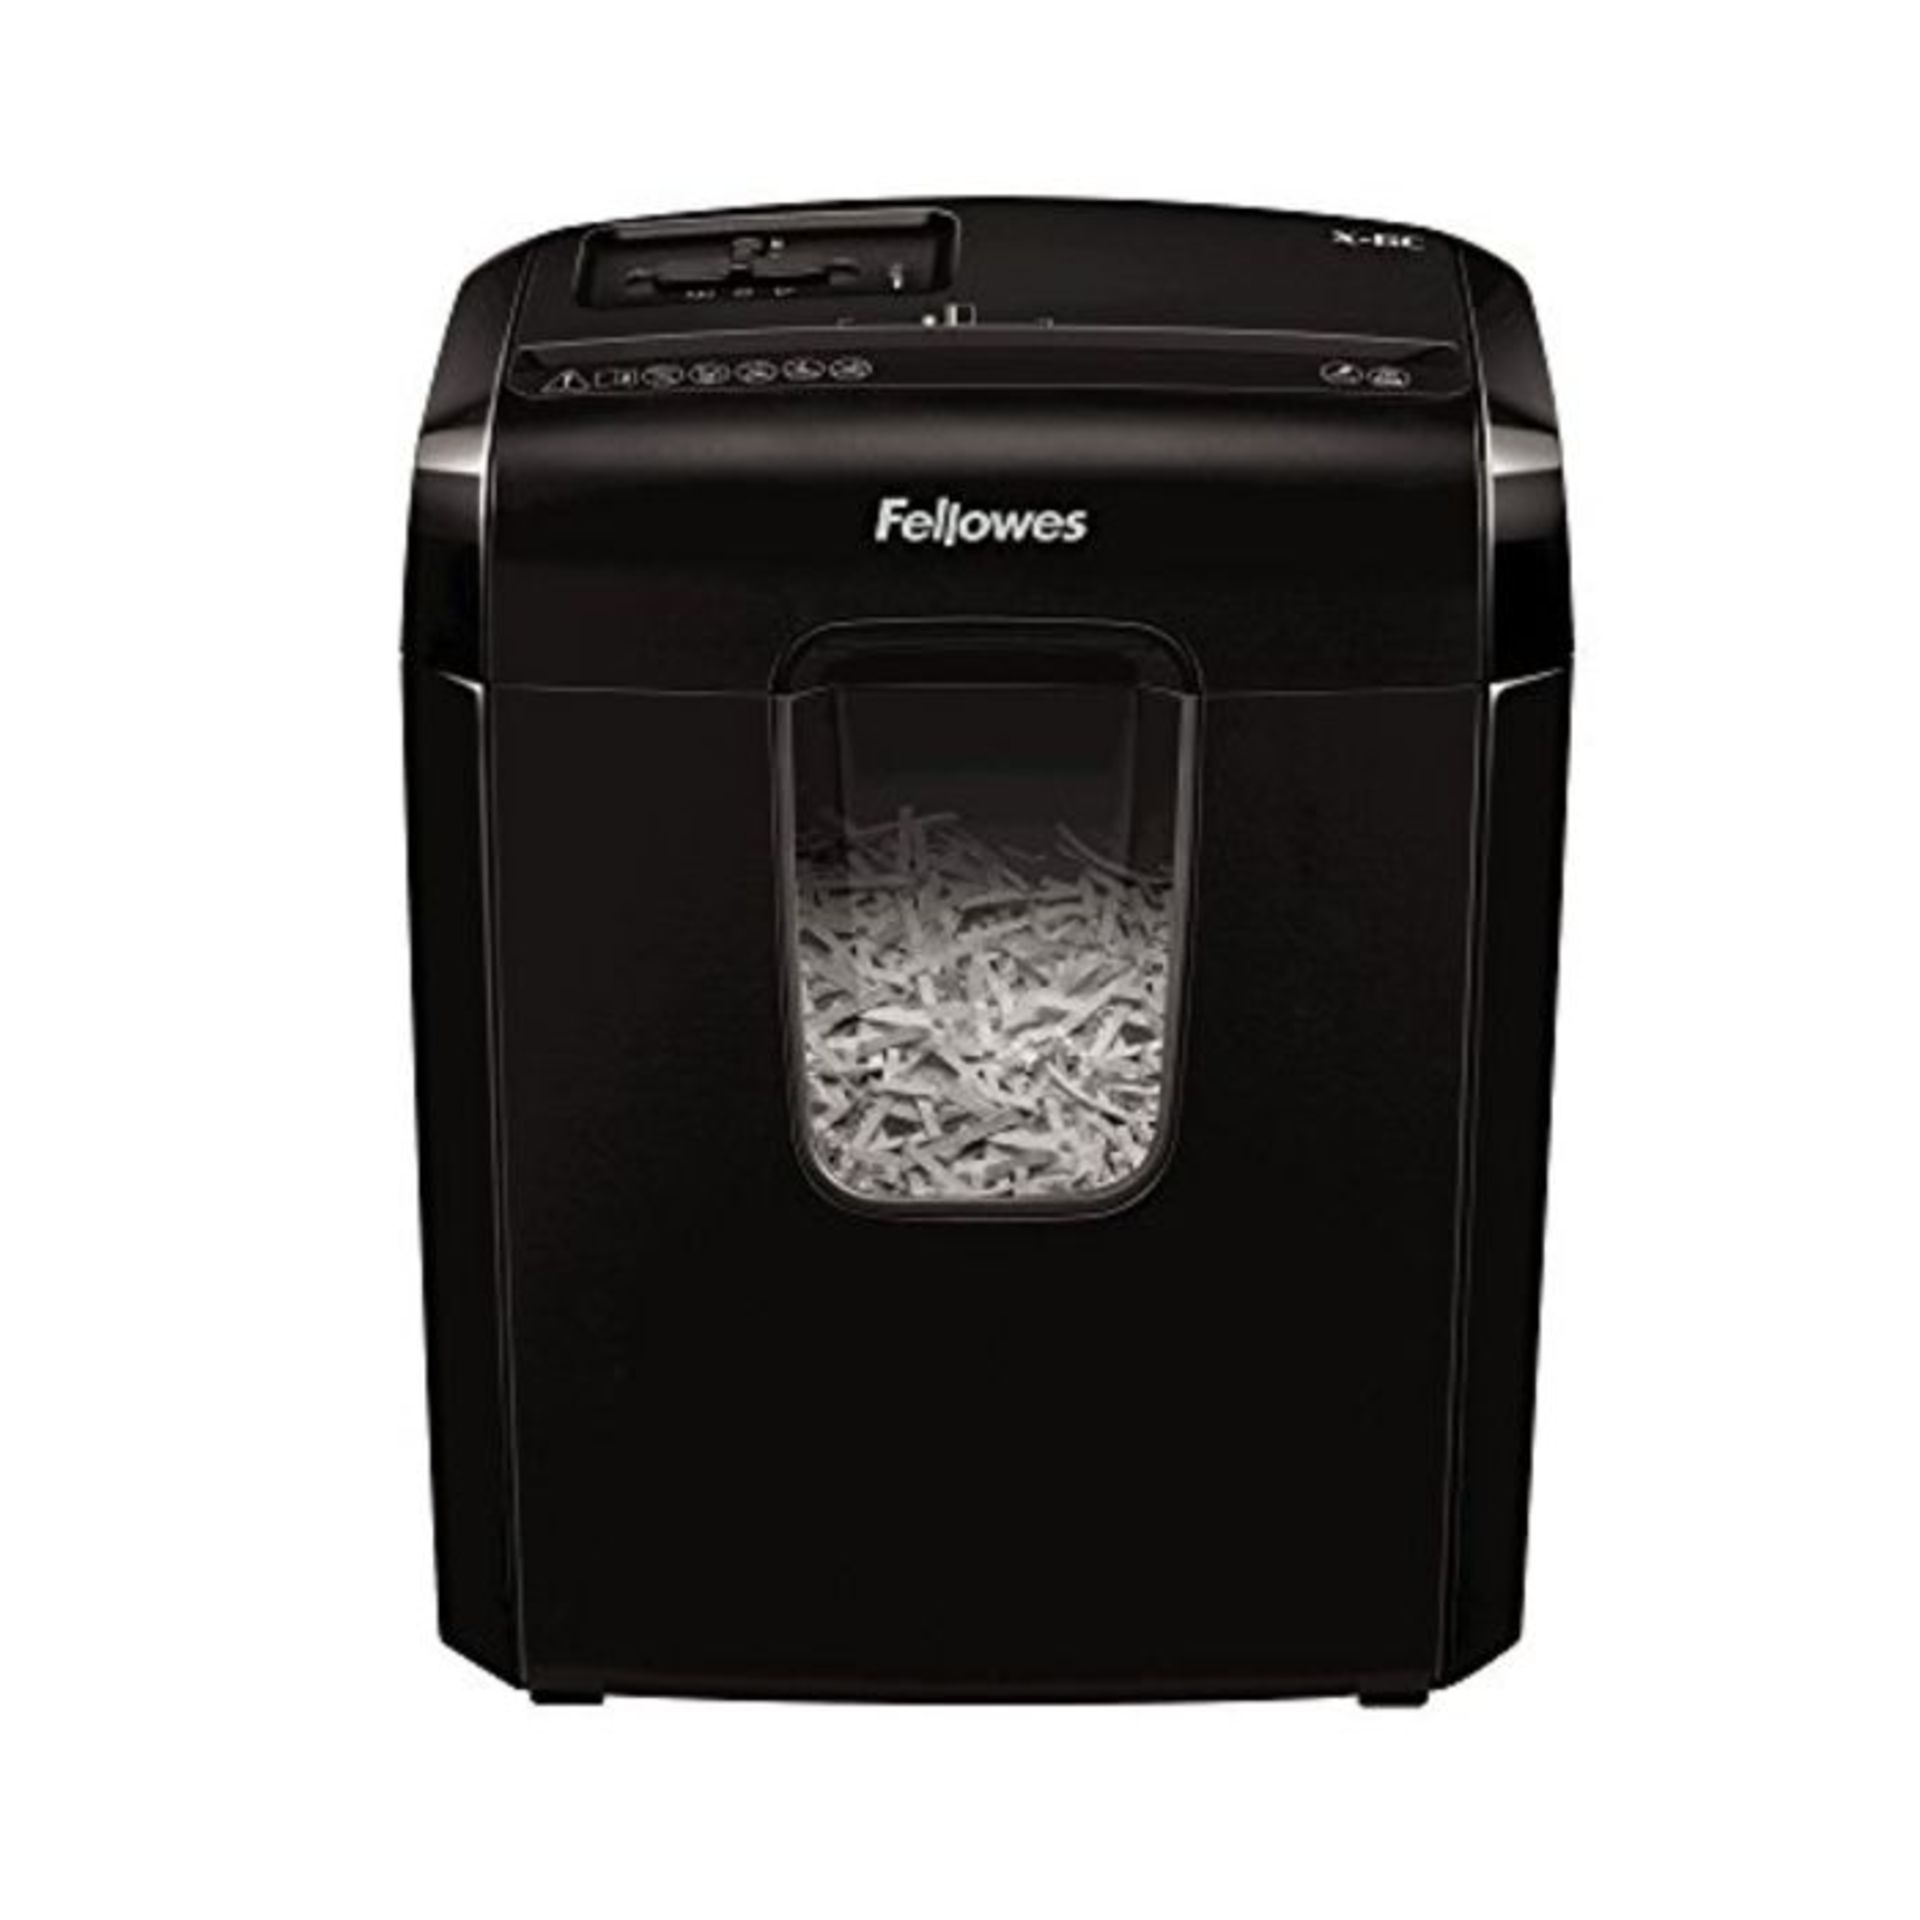 Fellowes Powershred X-6C Personal 6 Sheet Cross Cut Paper Shredder for Home Use - with